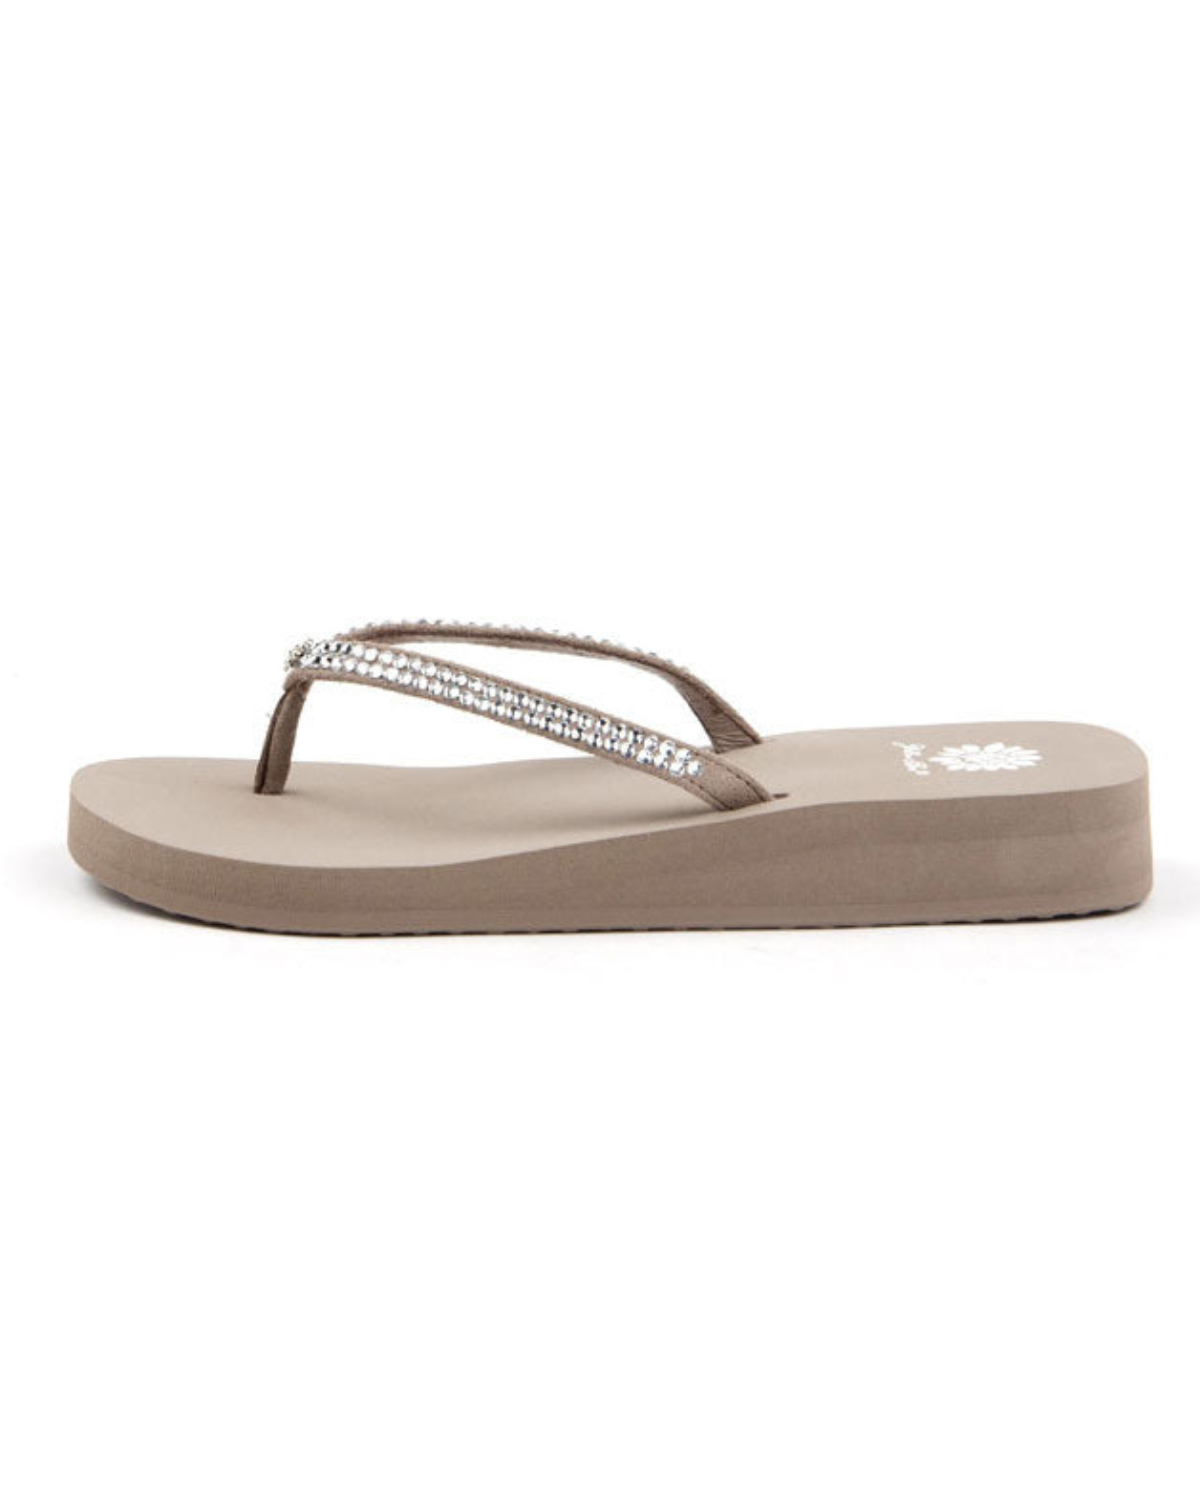 Women's taupe wedge sandal with rhinestones on the strap.